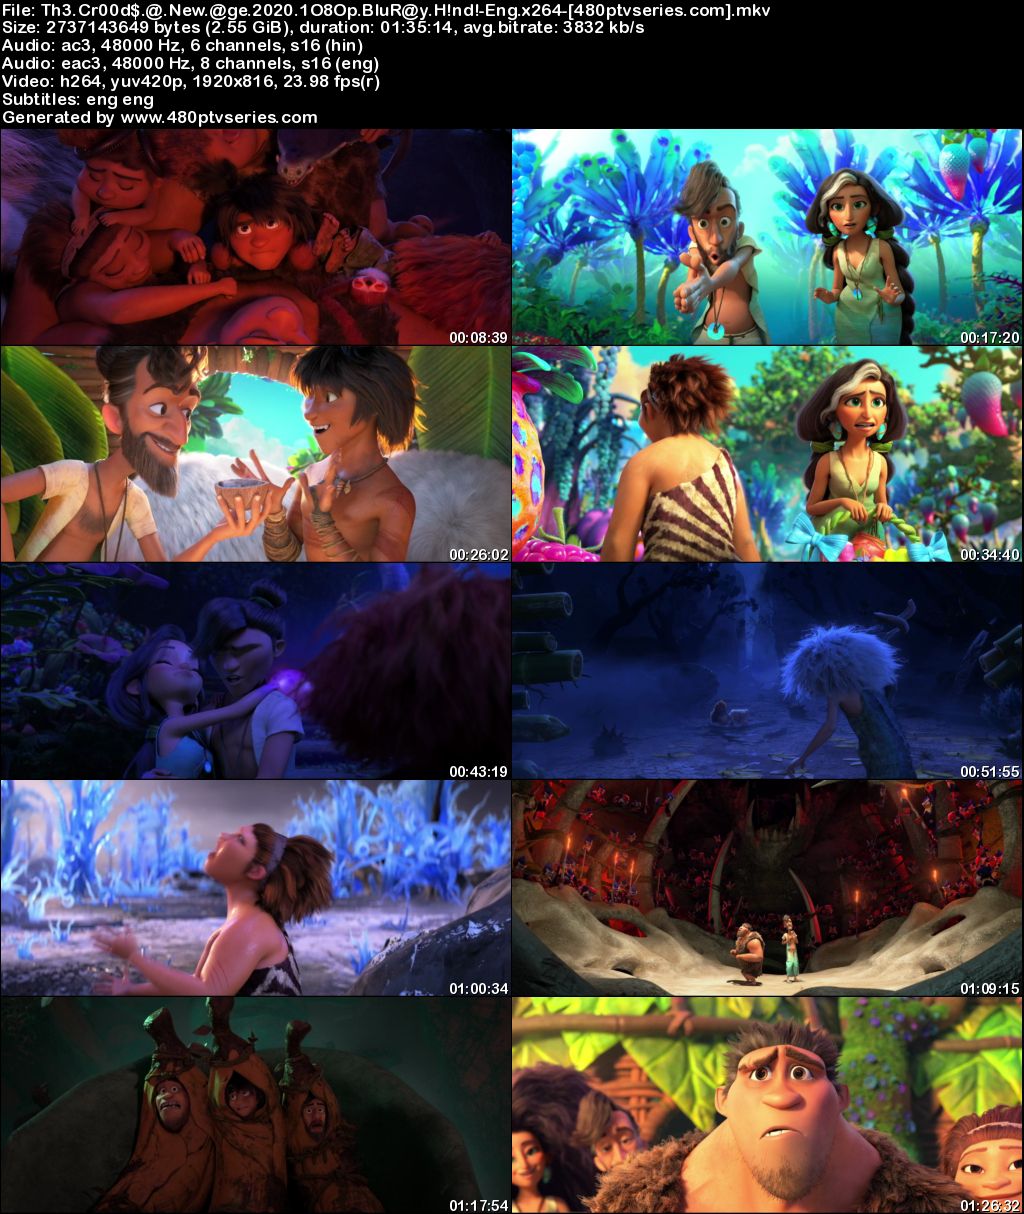 Watch Online Free The Croods 2: A New Age (2020) Full Hindi Dual Audio Movie Download 1080p 720p 480p BluRay